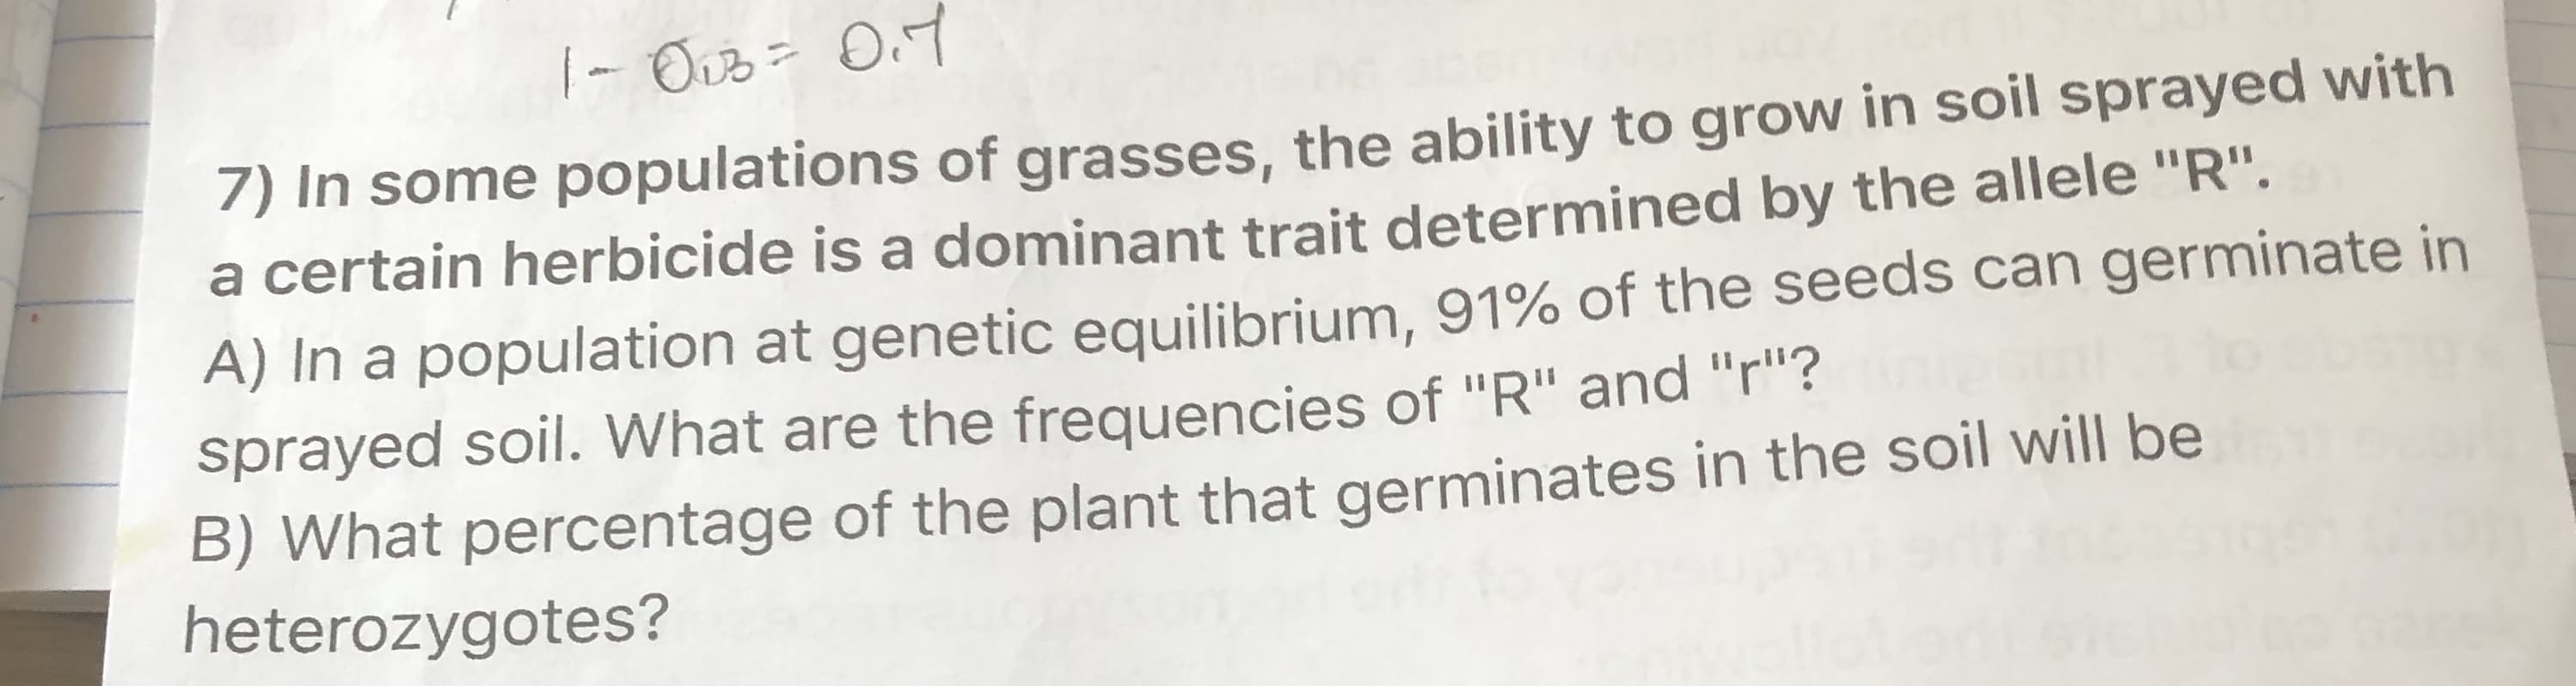 7) In some populations of grasses, the ability to grow in soil sprayed with
a certain herbicide is a dominant trait determined by the allele "R".
A) In a population at genetic equilibrium, 91% of the seeds can germinate in
sprayed soil. What are the frequencies of "R" and "r"?
B) What percentage of the plant that germinates in the soil will be
heterozygotes?
